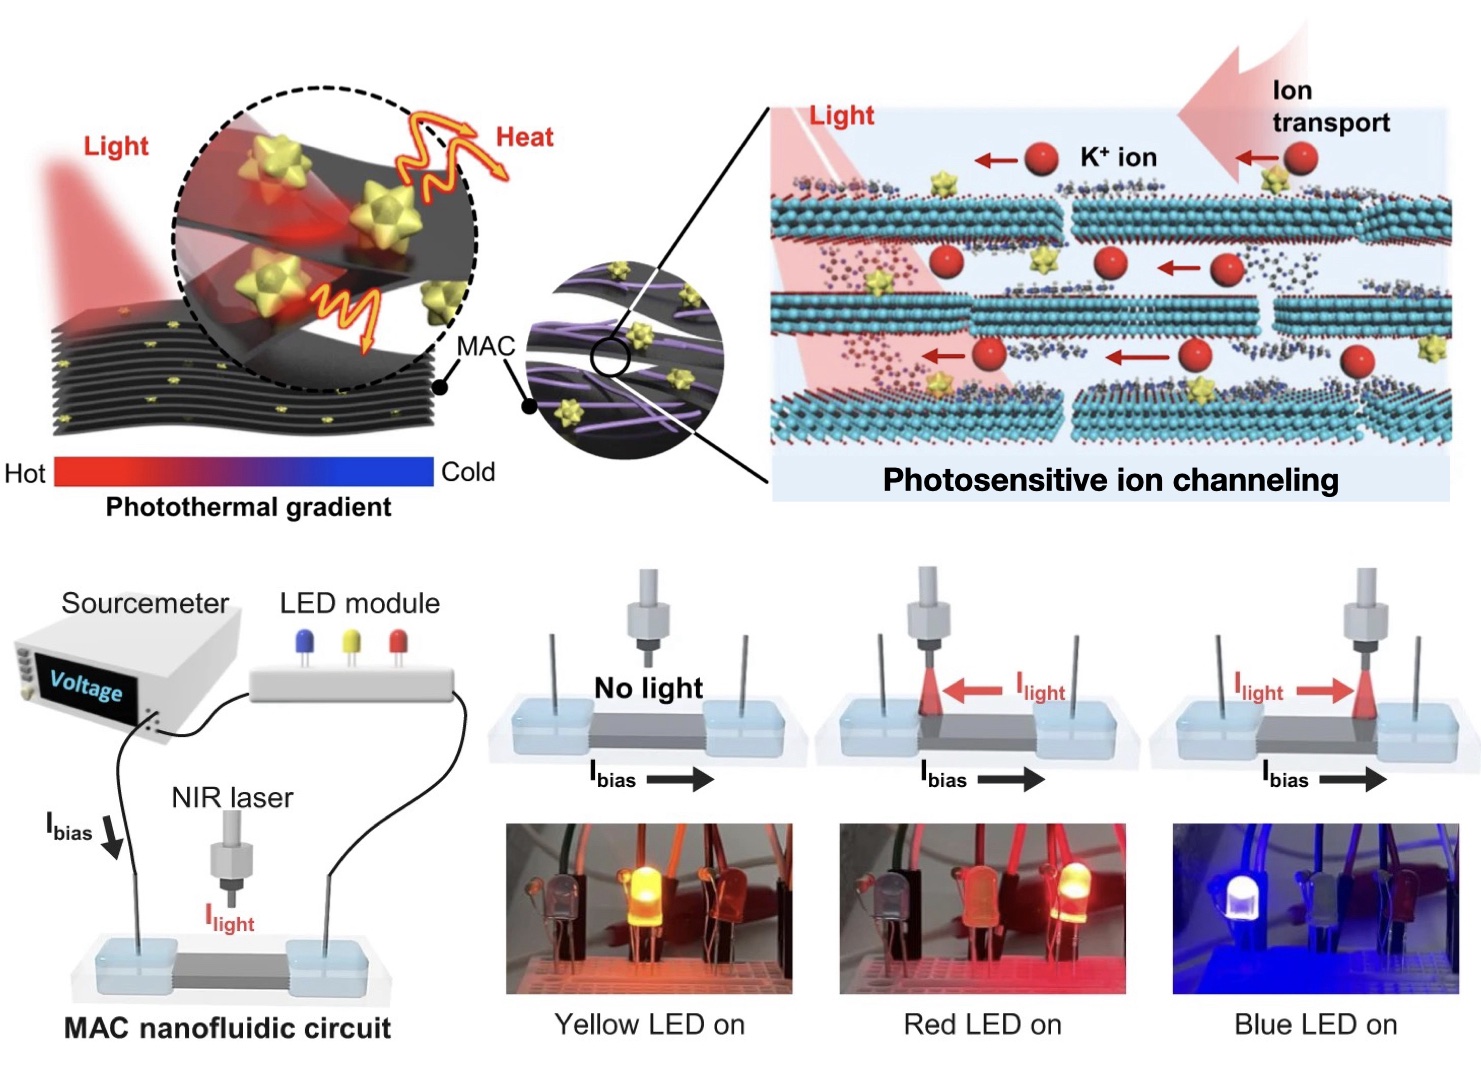 Photosensitive ion channels in layered MXene membranes modified with plasmonic gold nanostars and cellulose nanofibers